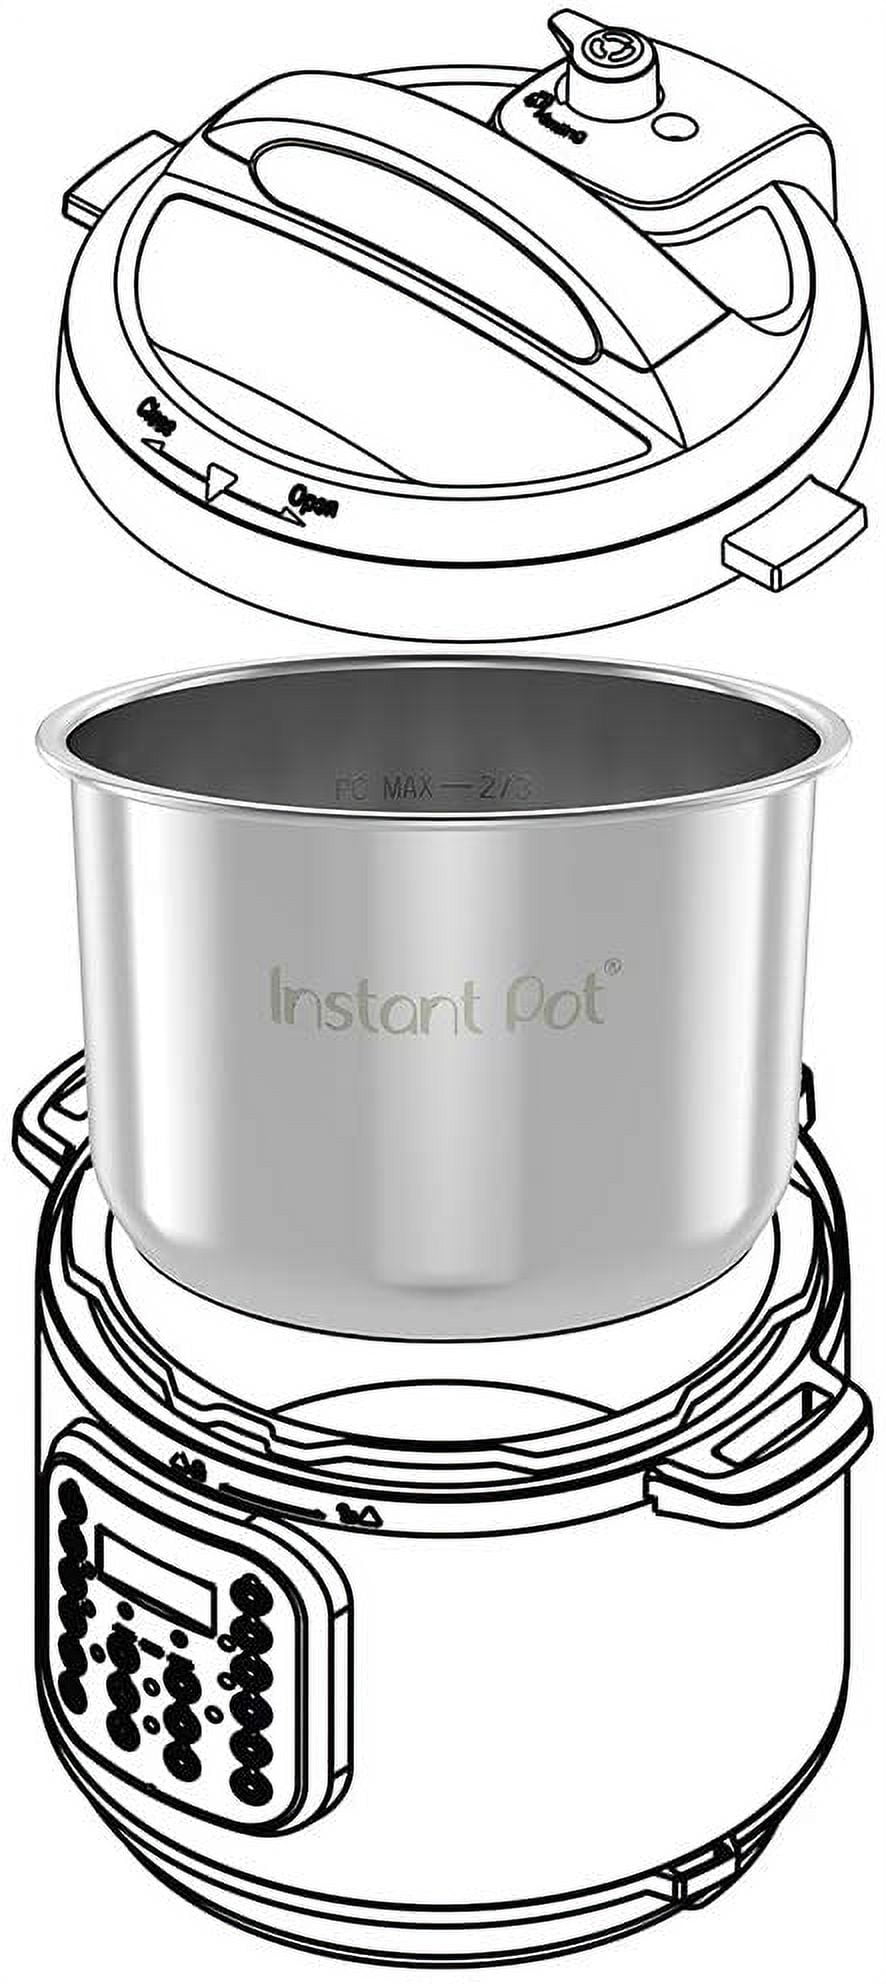 Genuine Inner Pot for Instant Pot 6 Qt Pot for InstaPot Inner Cooking Pot  Stainless Steel (Equivalent to IP-POT-SS304-60) Nonstick Pot for IP-DUO